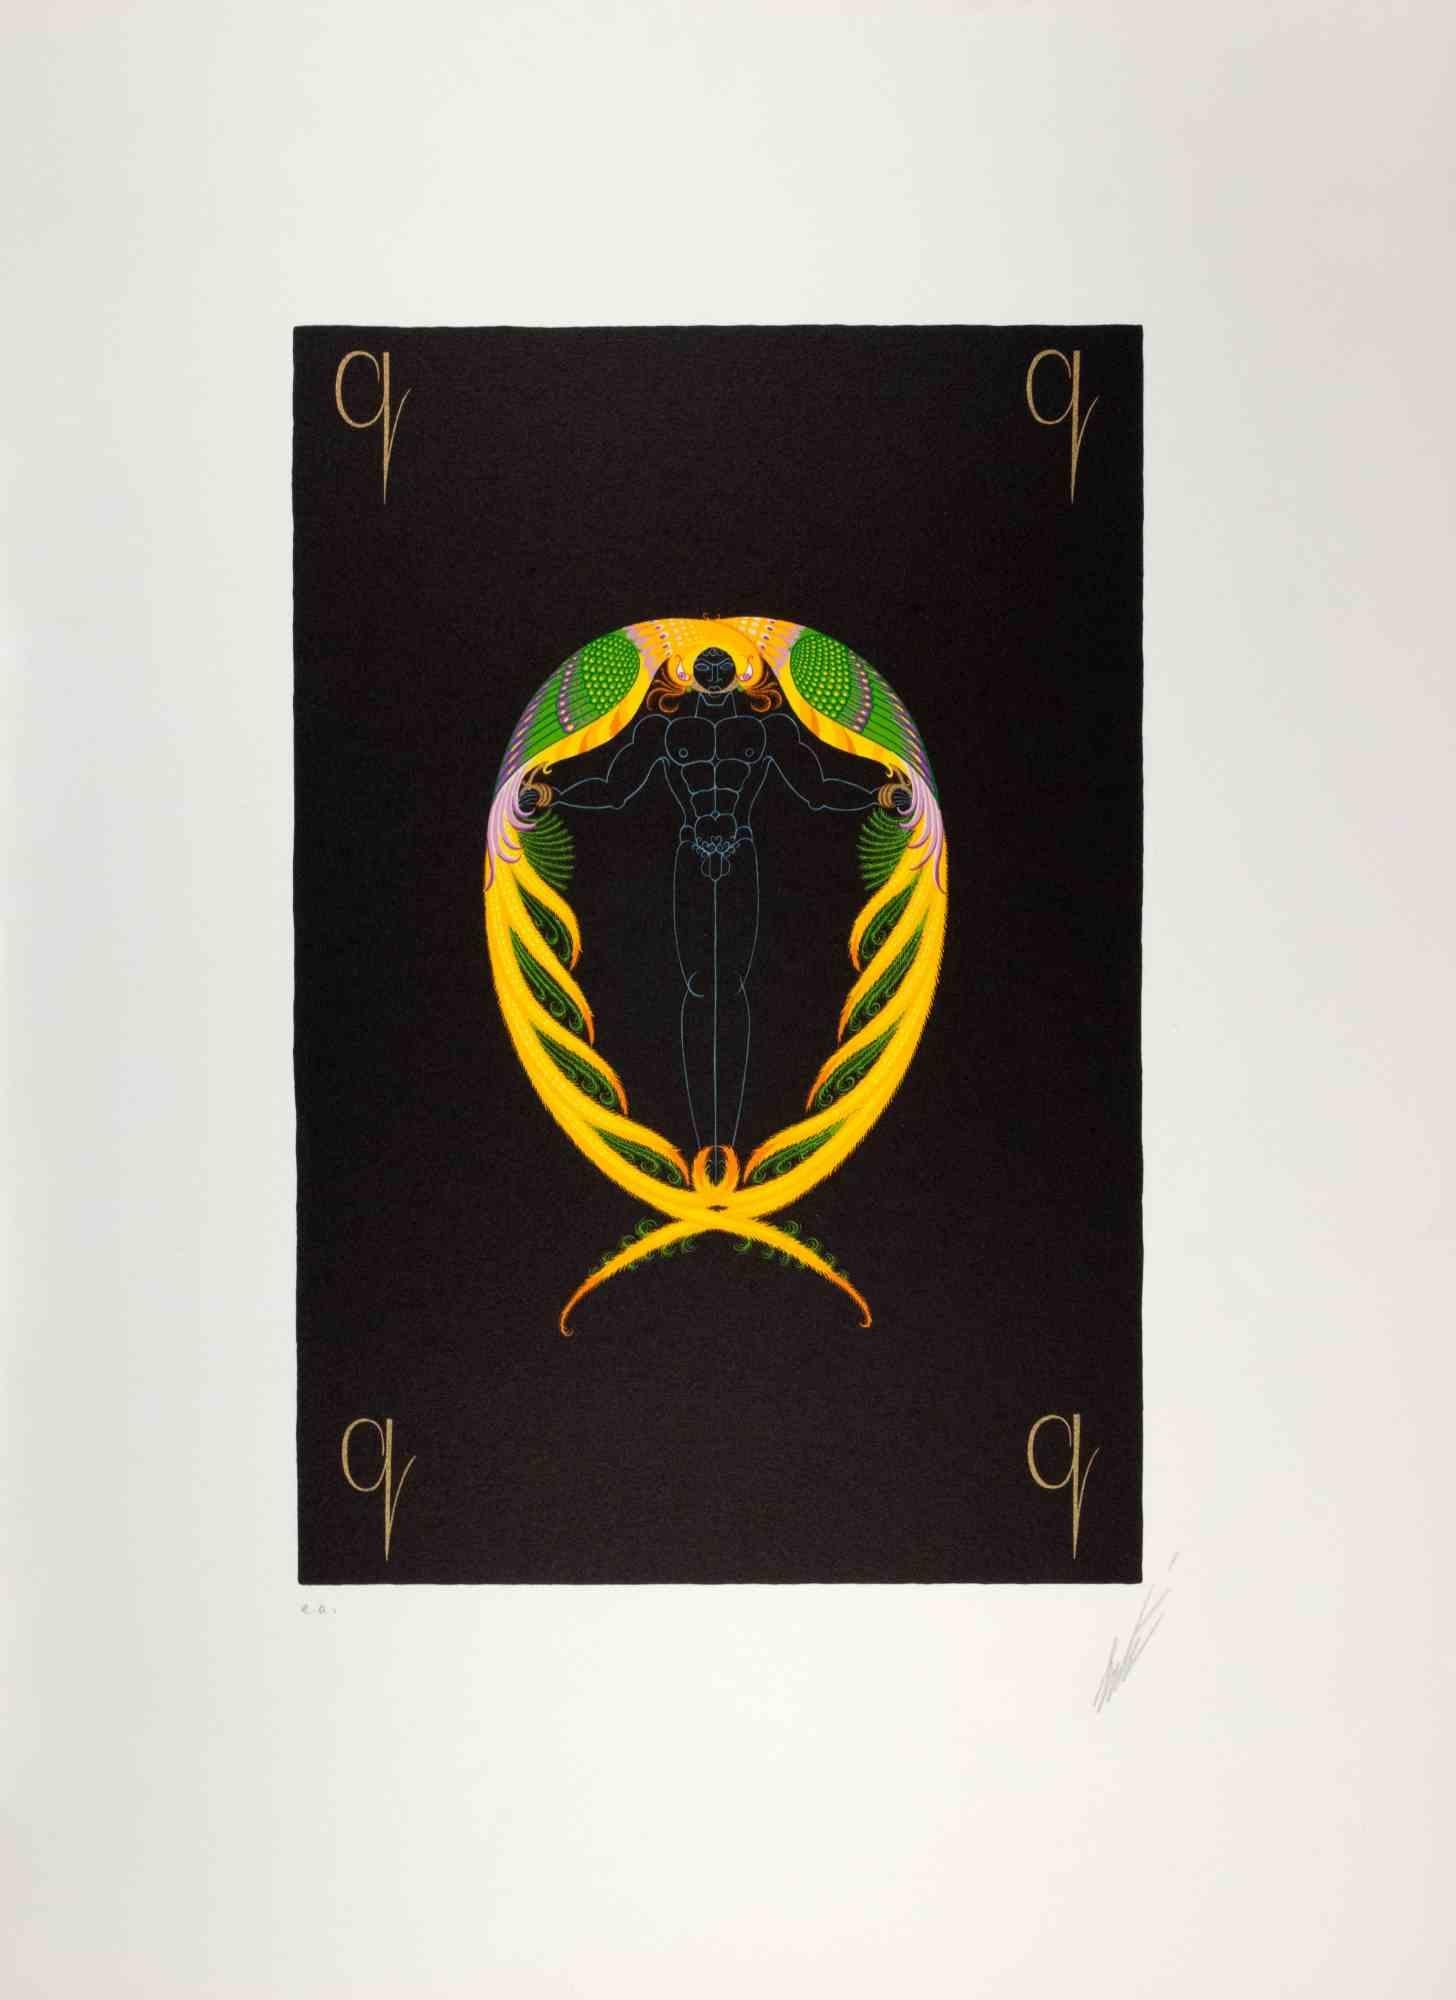 Letter Q - from the suite Letters of the Alphabet is a contemporary artwork realized by Erté (Romain de Tirtoff).

Lithograph and Screen Print.

The artwork is from the suite "Letters of the Alphabet", 1976.

Hand signed on the lower margin. Artist